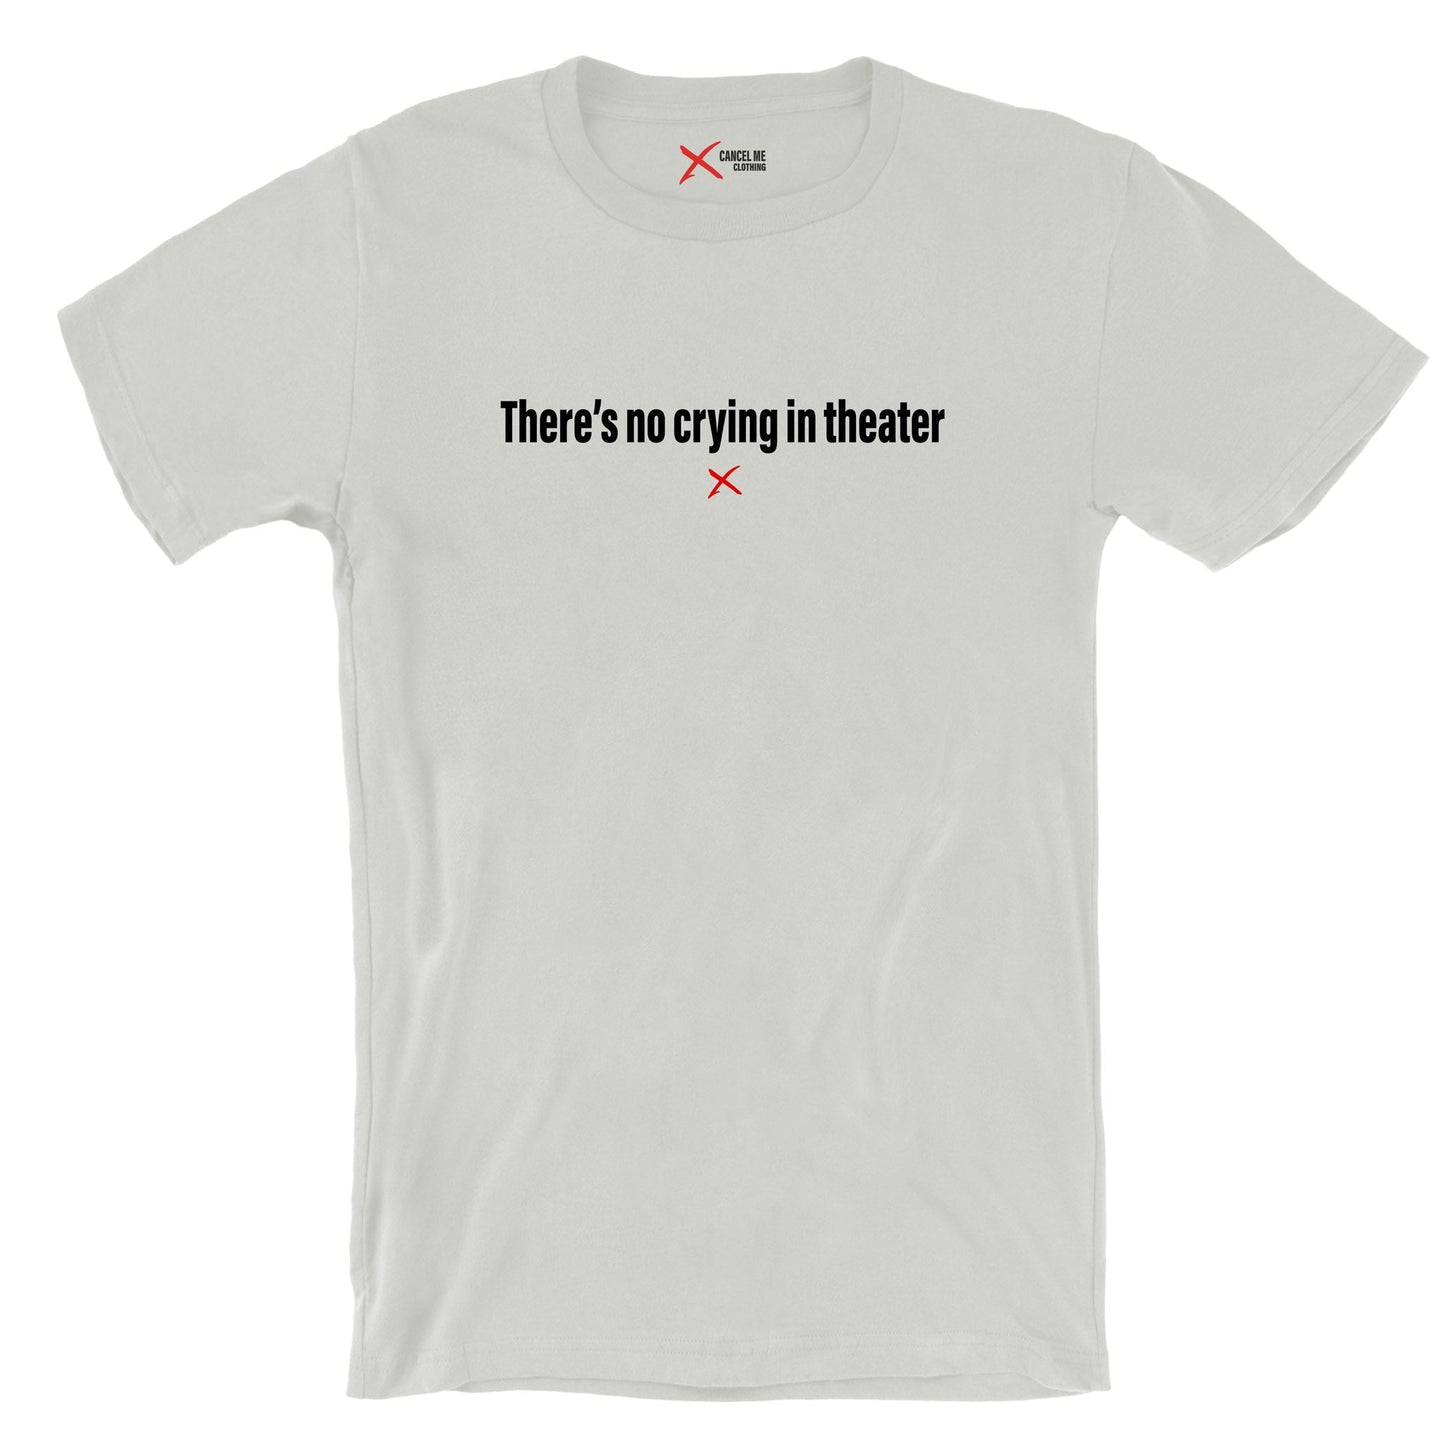 There's no crying in theater - Shirt